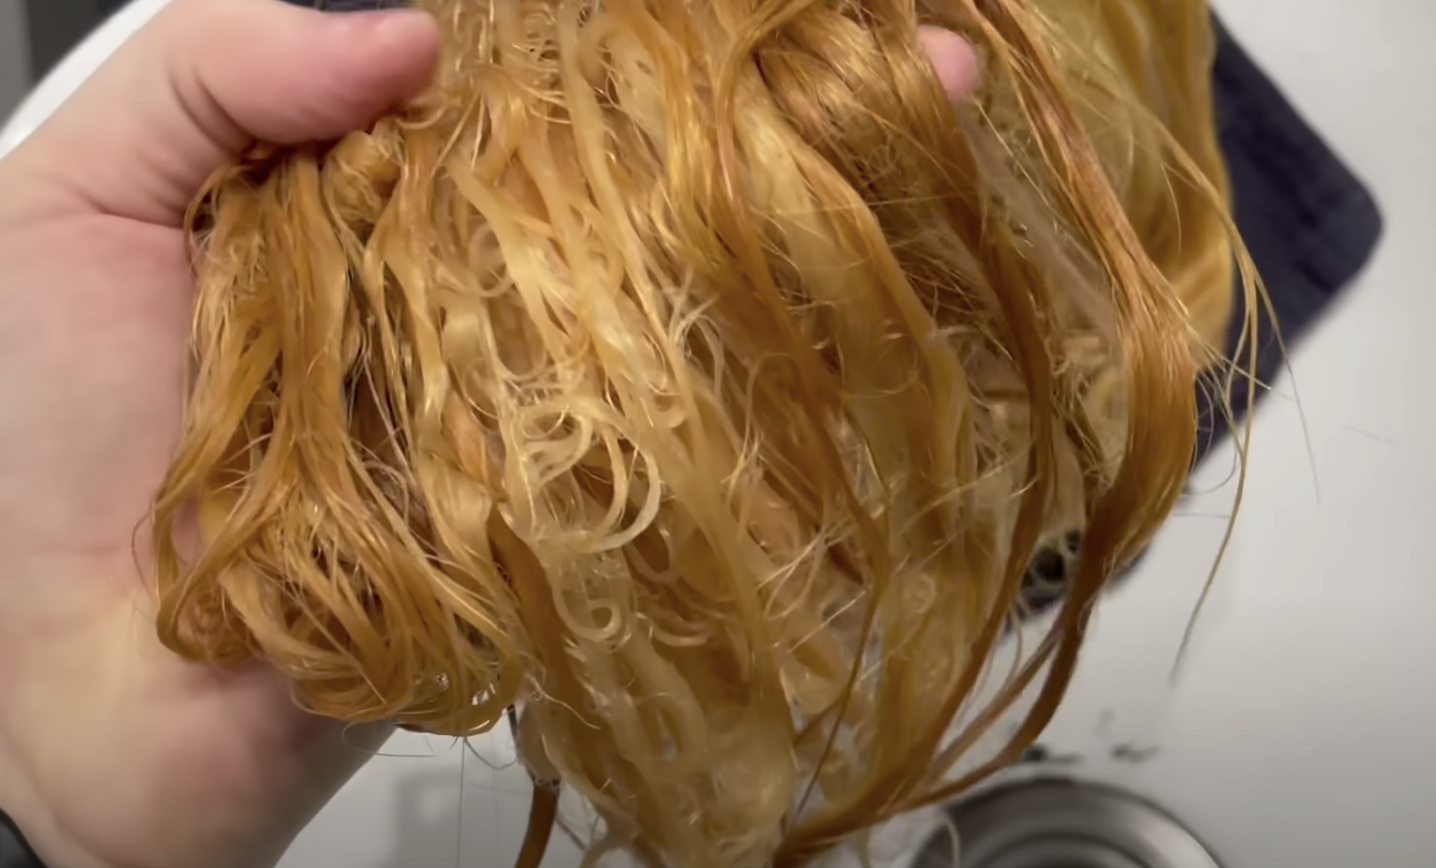 hair damaged from bleaching and colouring